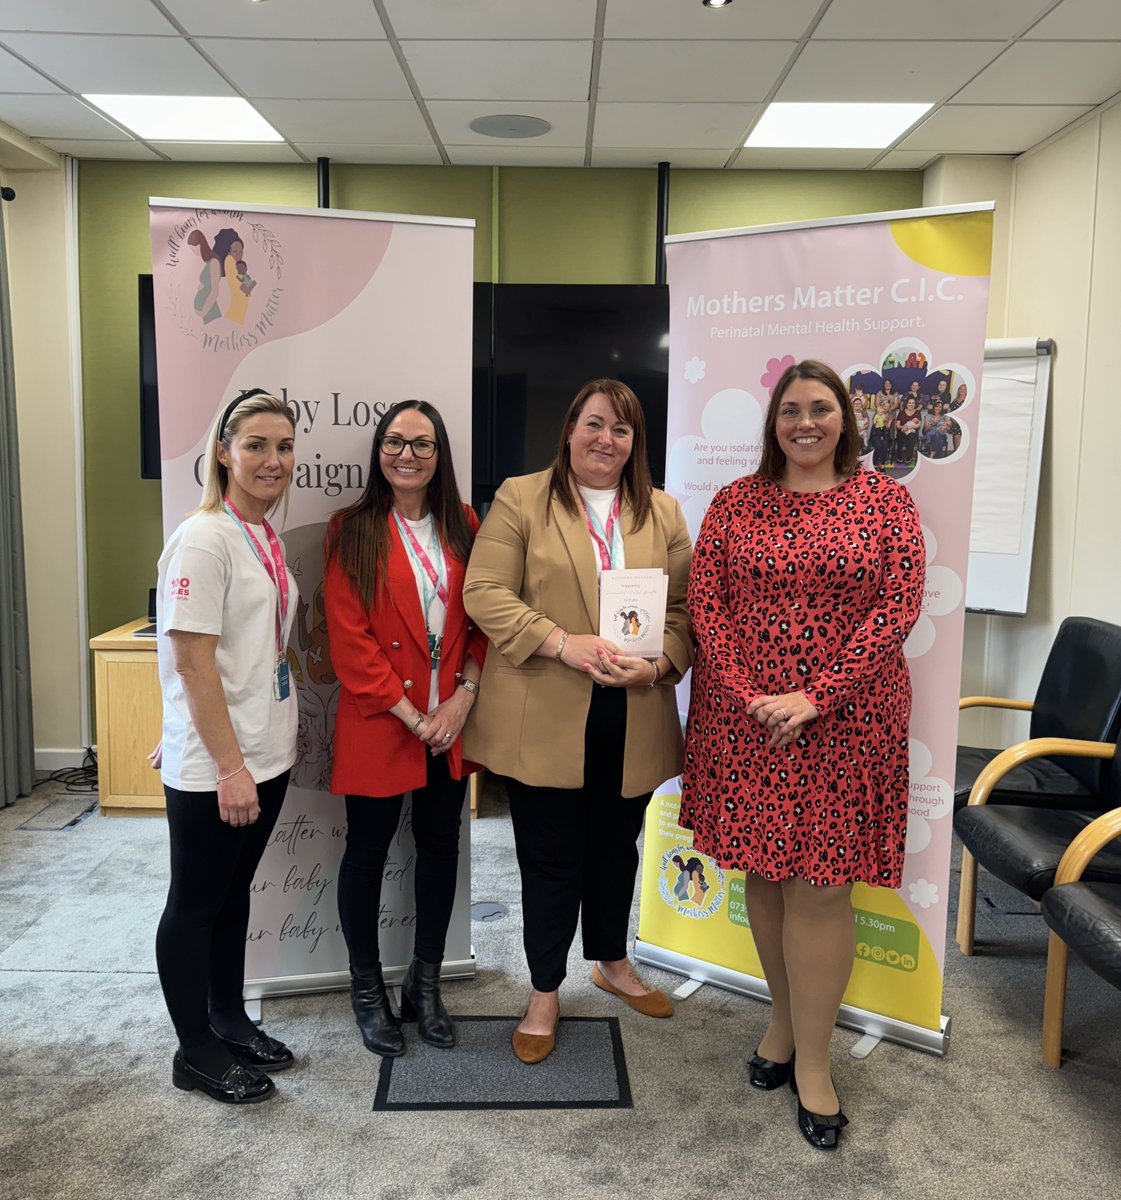 🤱It was lovely to be able to sponsor a drop in with Katy, Suzanne and Donna from @Mothersmatter20 to promote and bring awareness to the brilliant work they do across Rhondda Cynon Taf and beyond to support women and their families during their pre- and post-natal journeys.